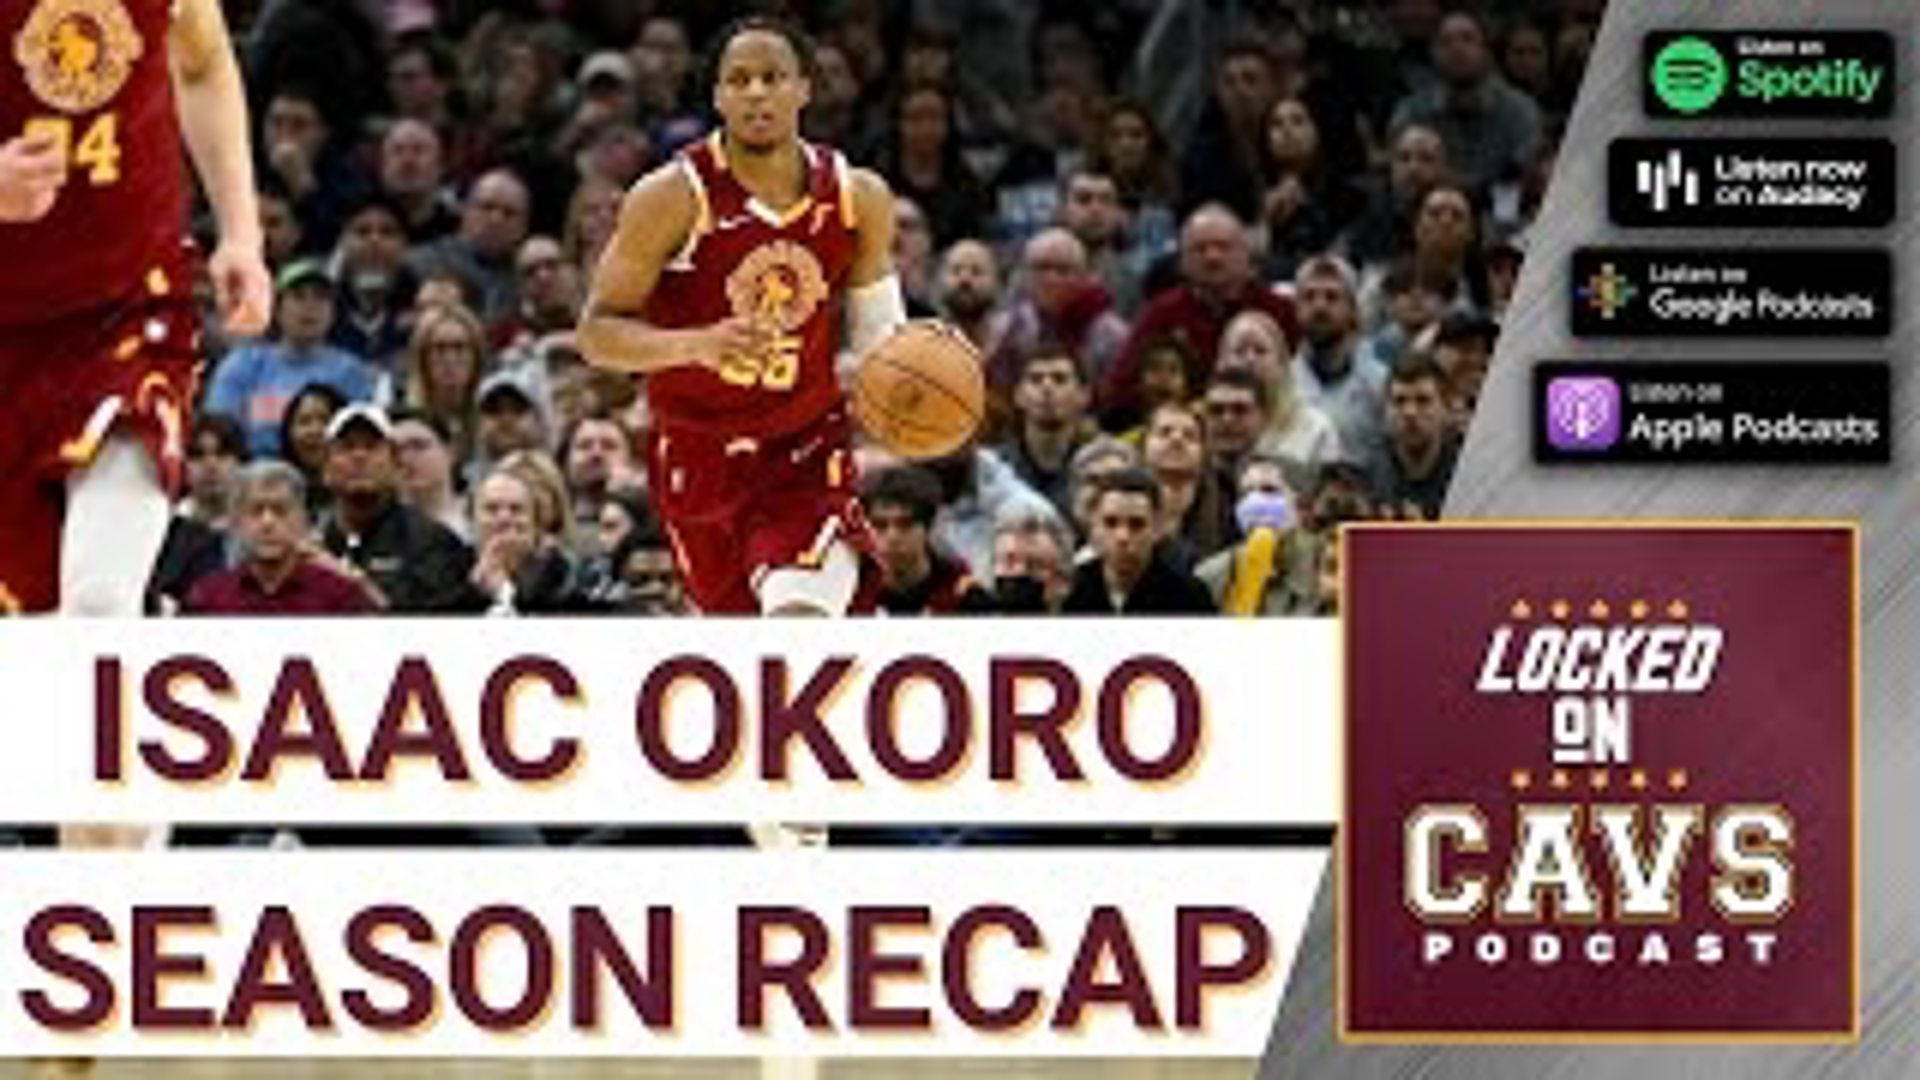 Isaac Okoro's improvements and positives from last year, including his improved three-point percentage, his on-ball defense and some small positives.